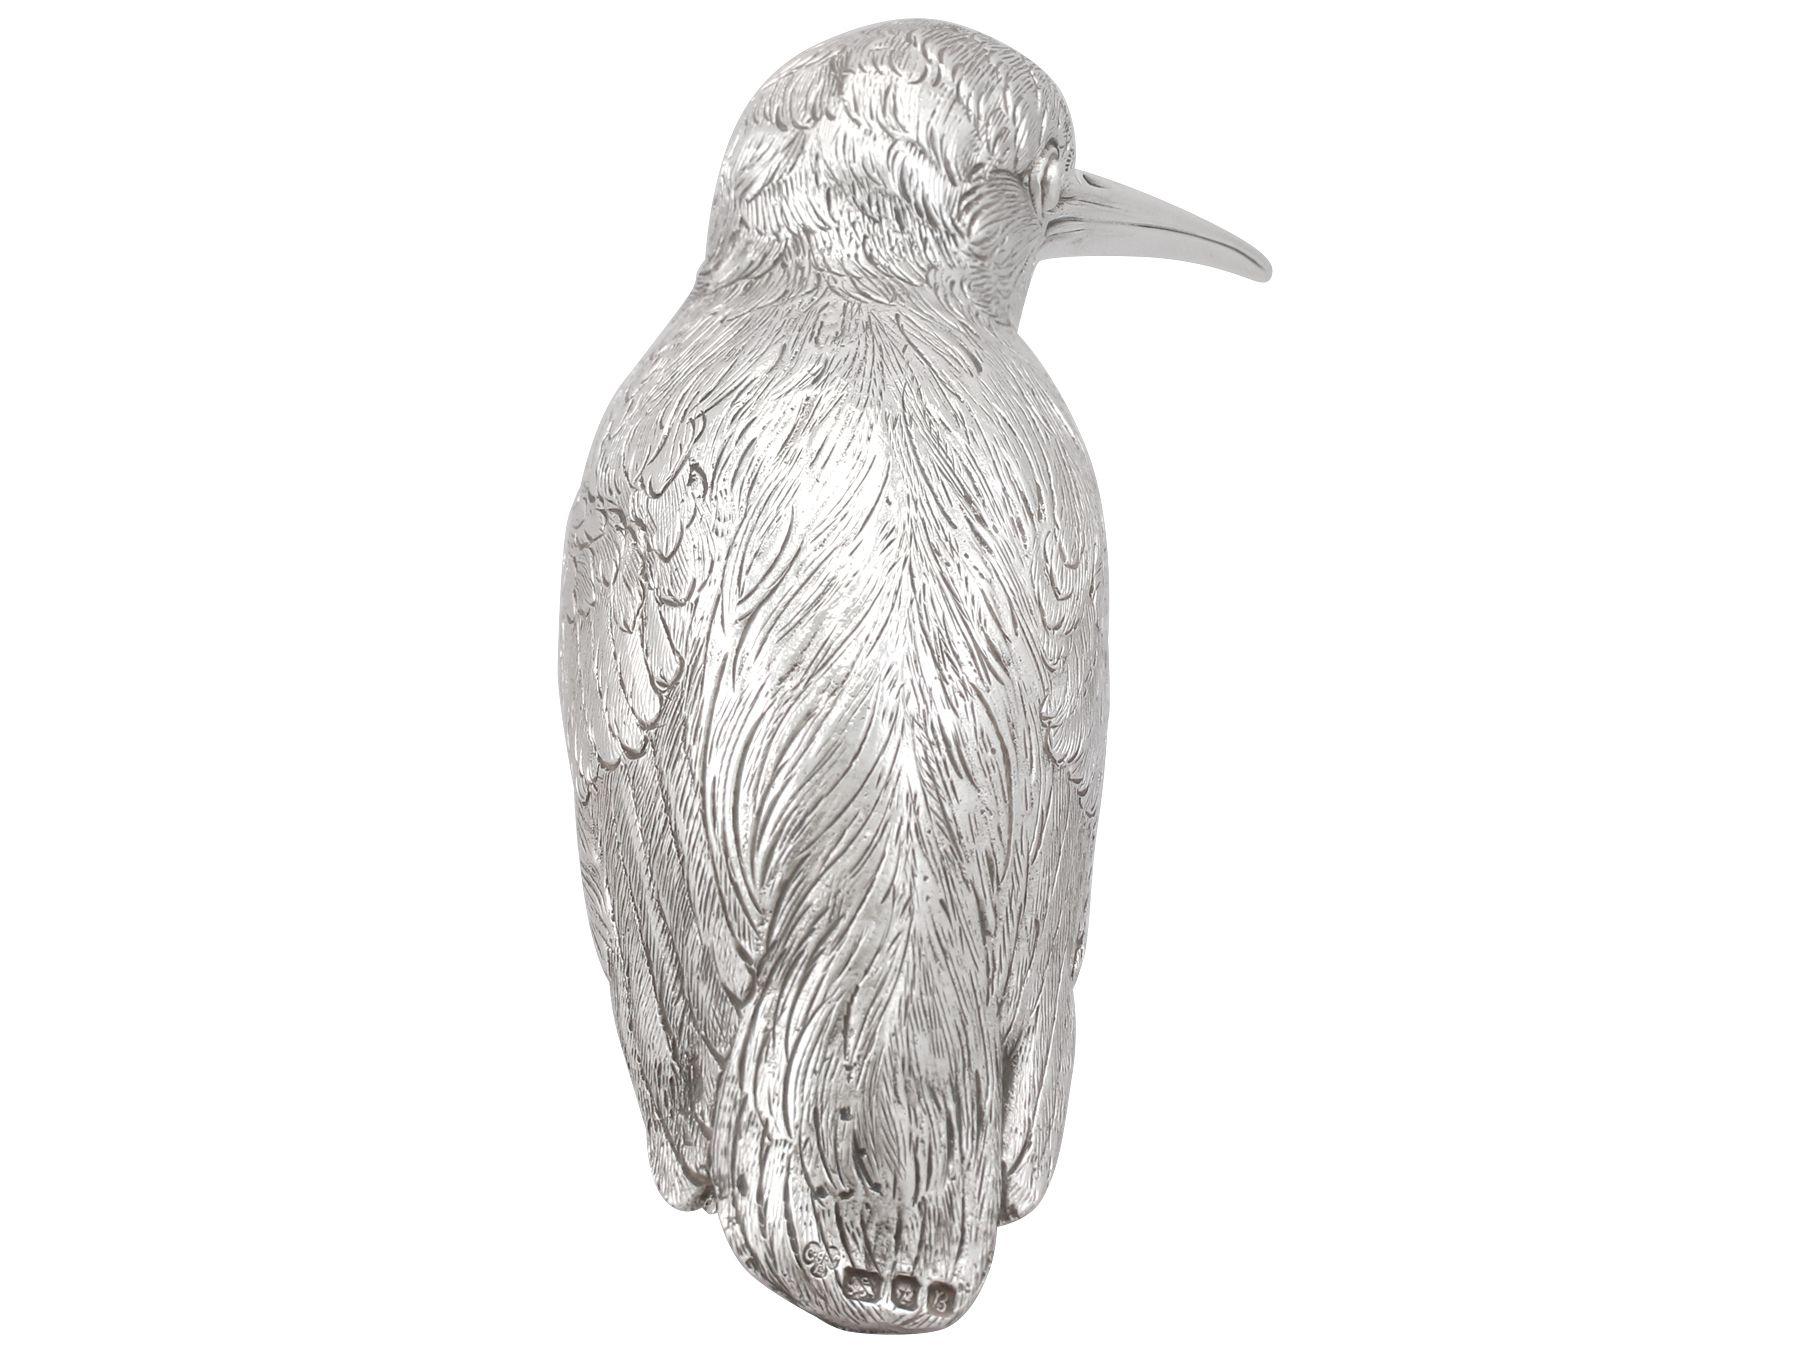 Vintage 1976 Sterling Silver Bird Ornament In Excellent Condition For Sale In Jesmond, Newcastle Upon Tyne